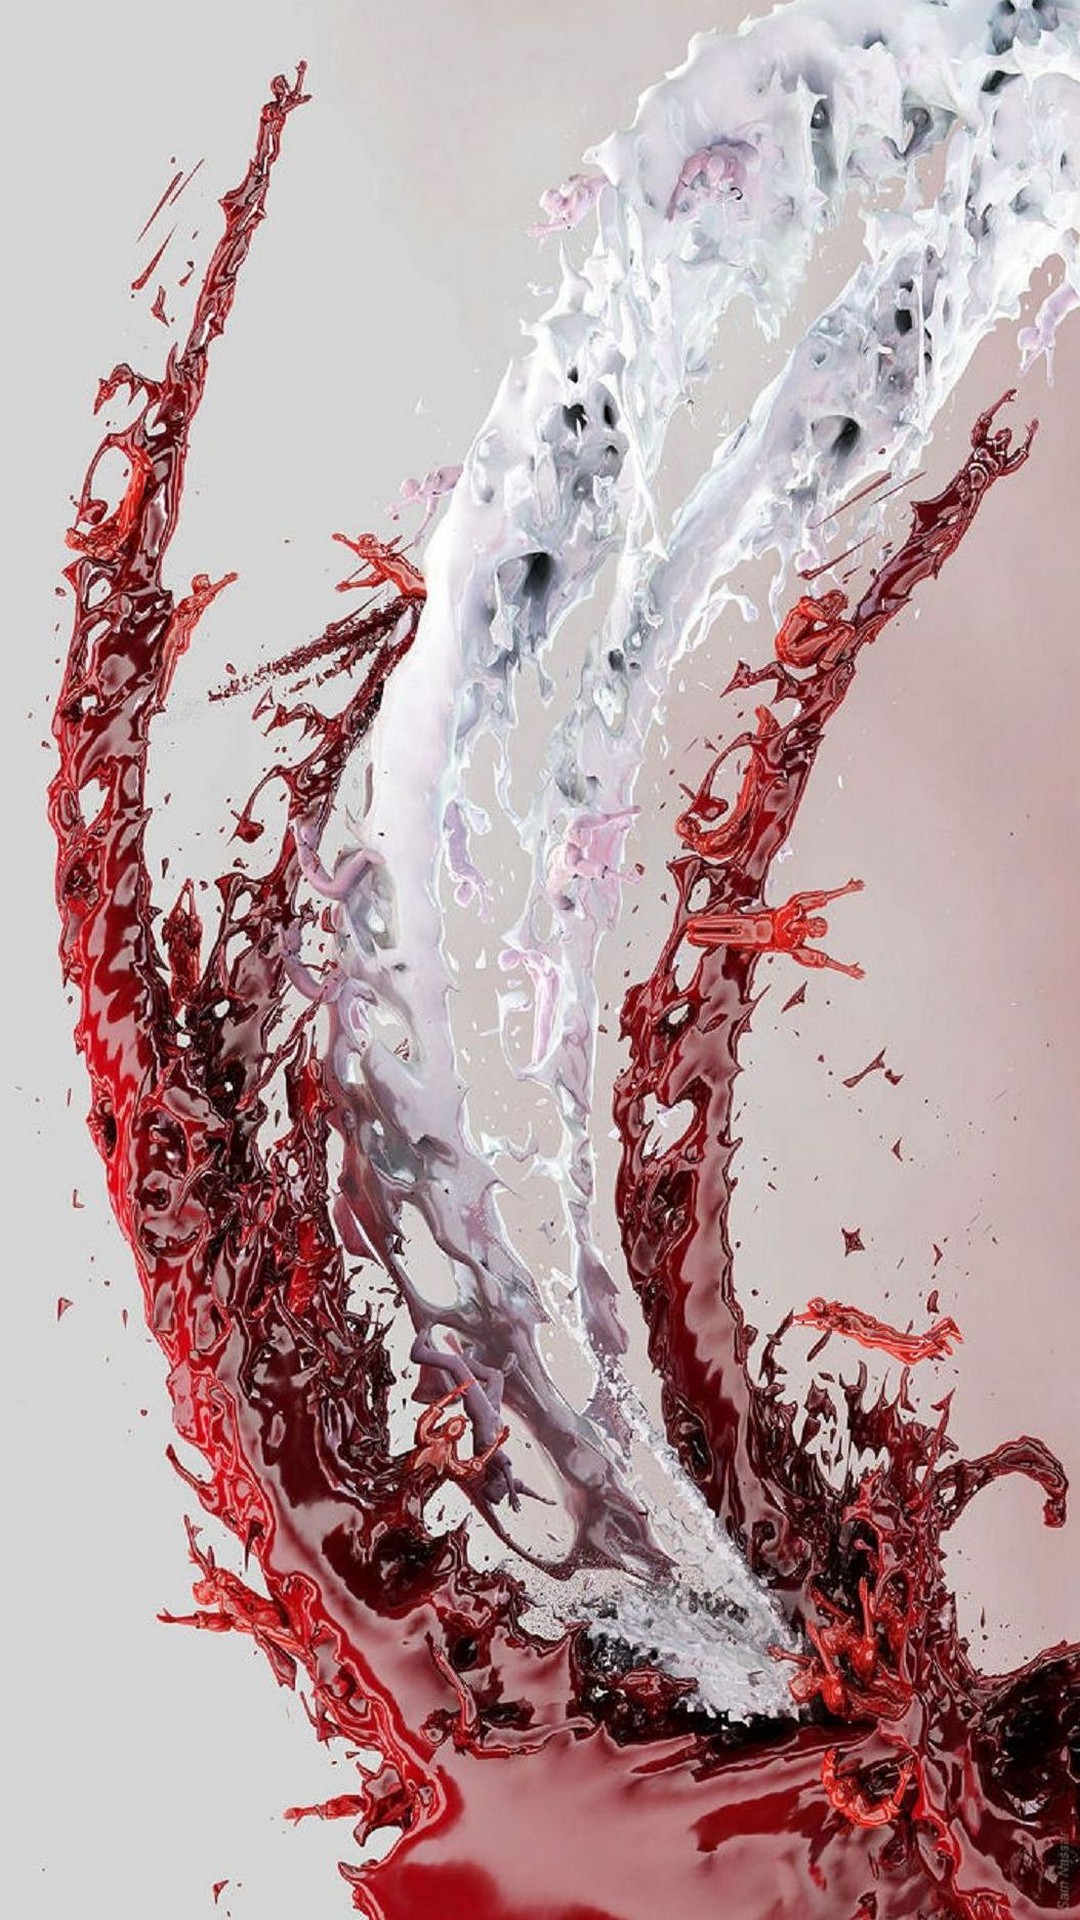 Red and White Liquid iPhone Wallpaper resolution 1080x1920